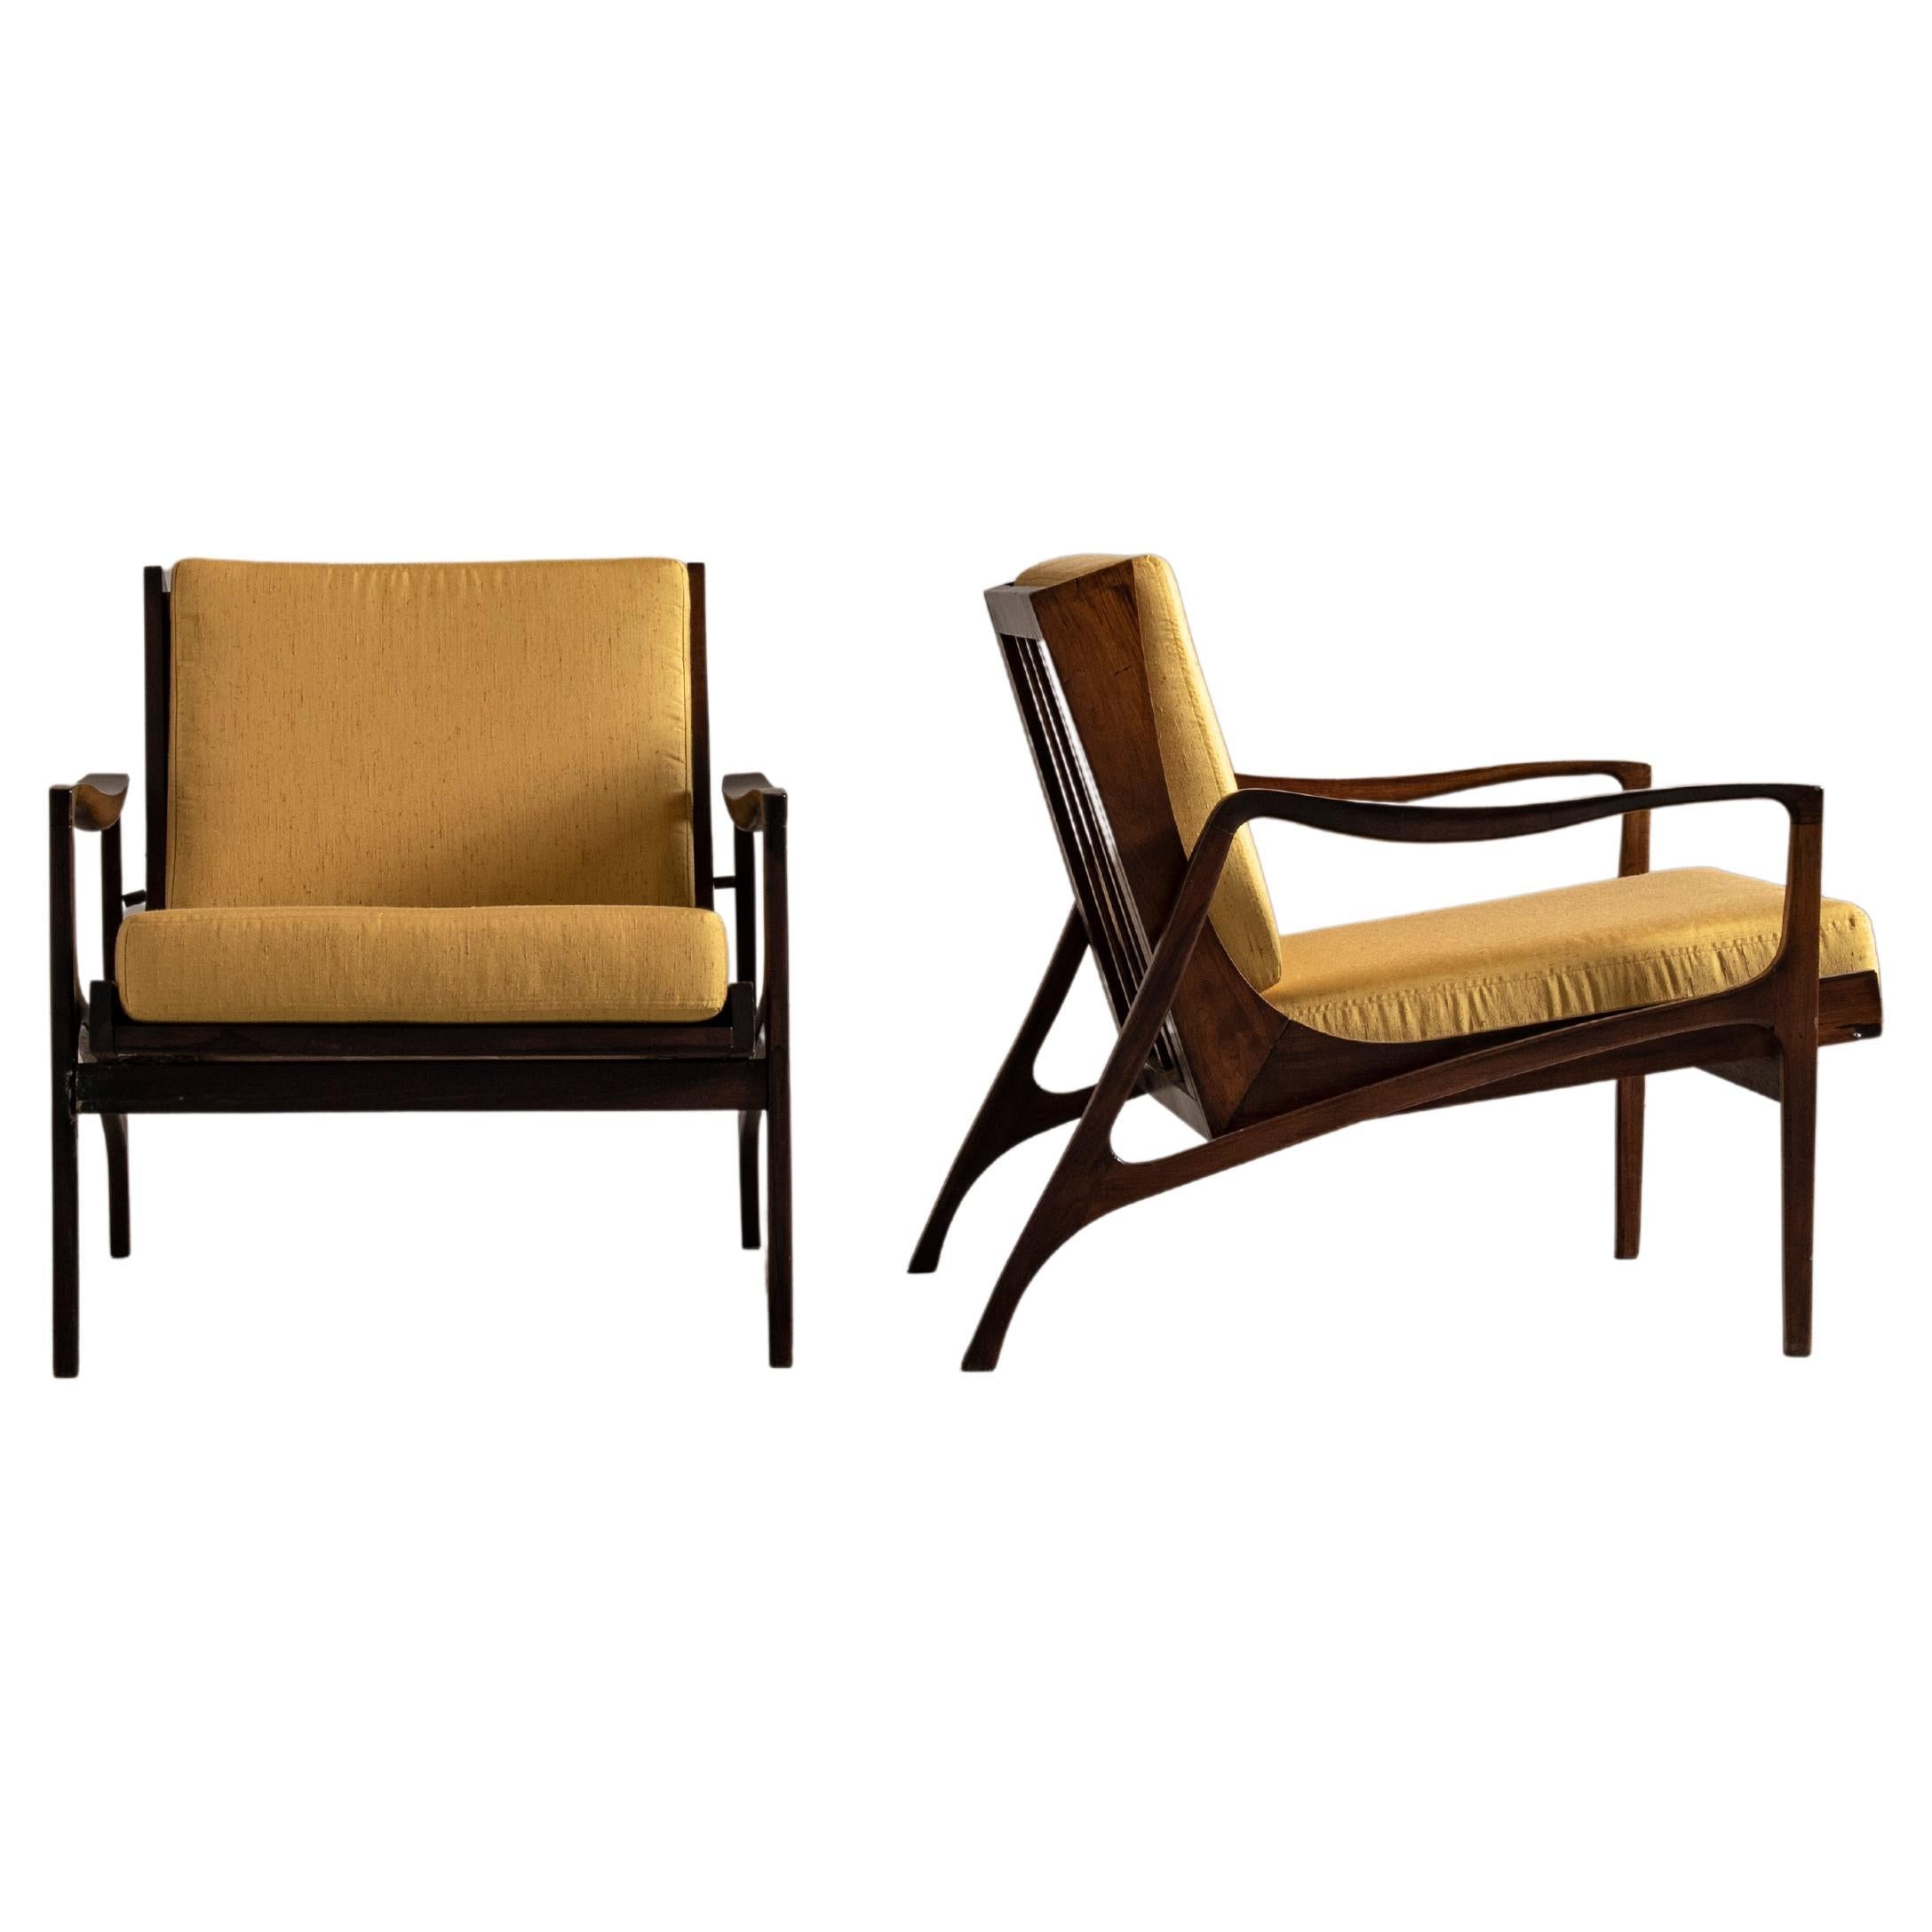 Pair of Lounge Chairs in Solid Brazilian Hardwood, Mid-Century Modern Design